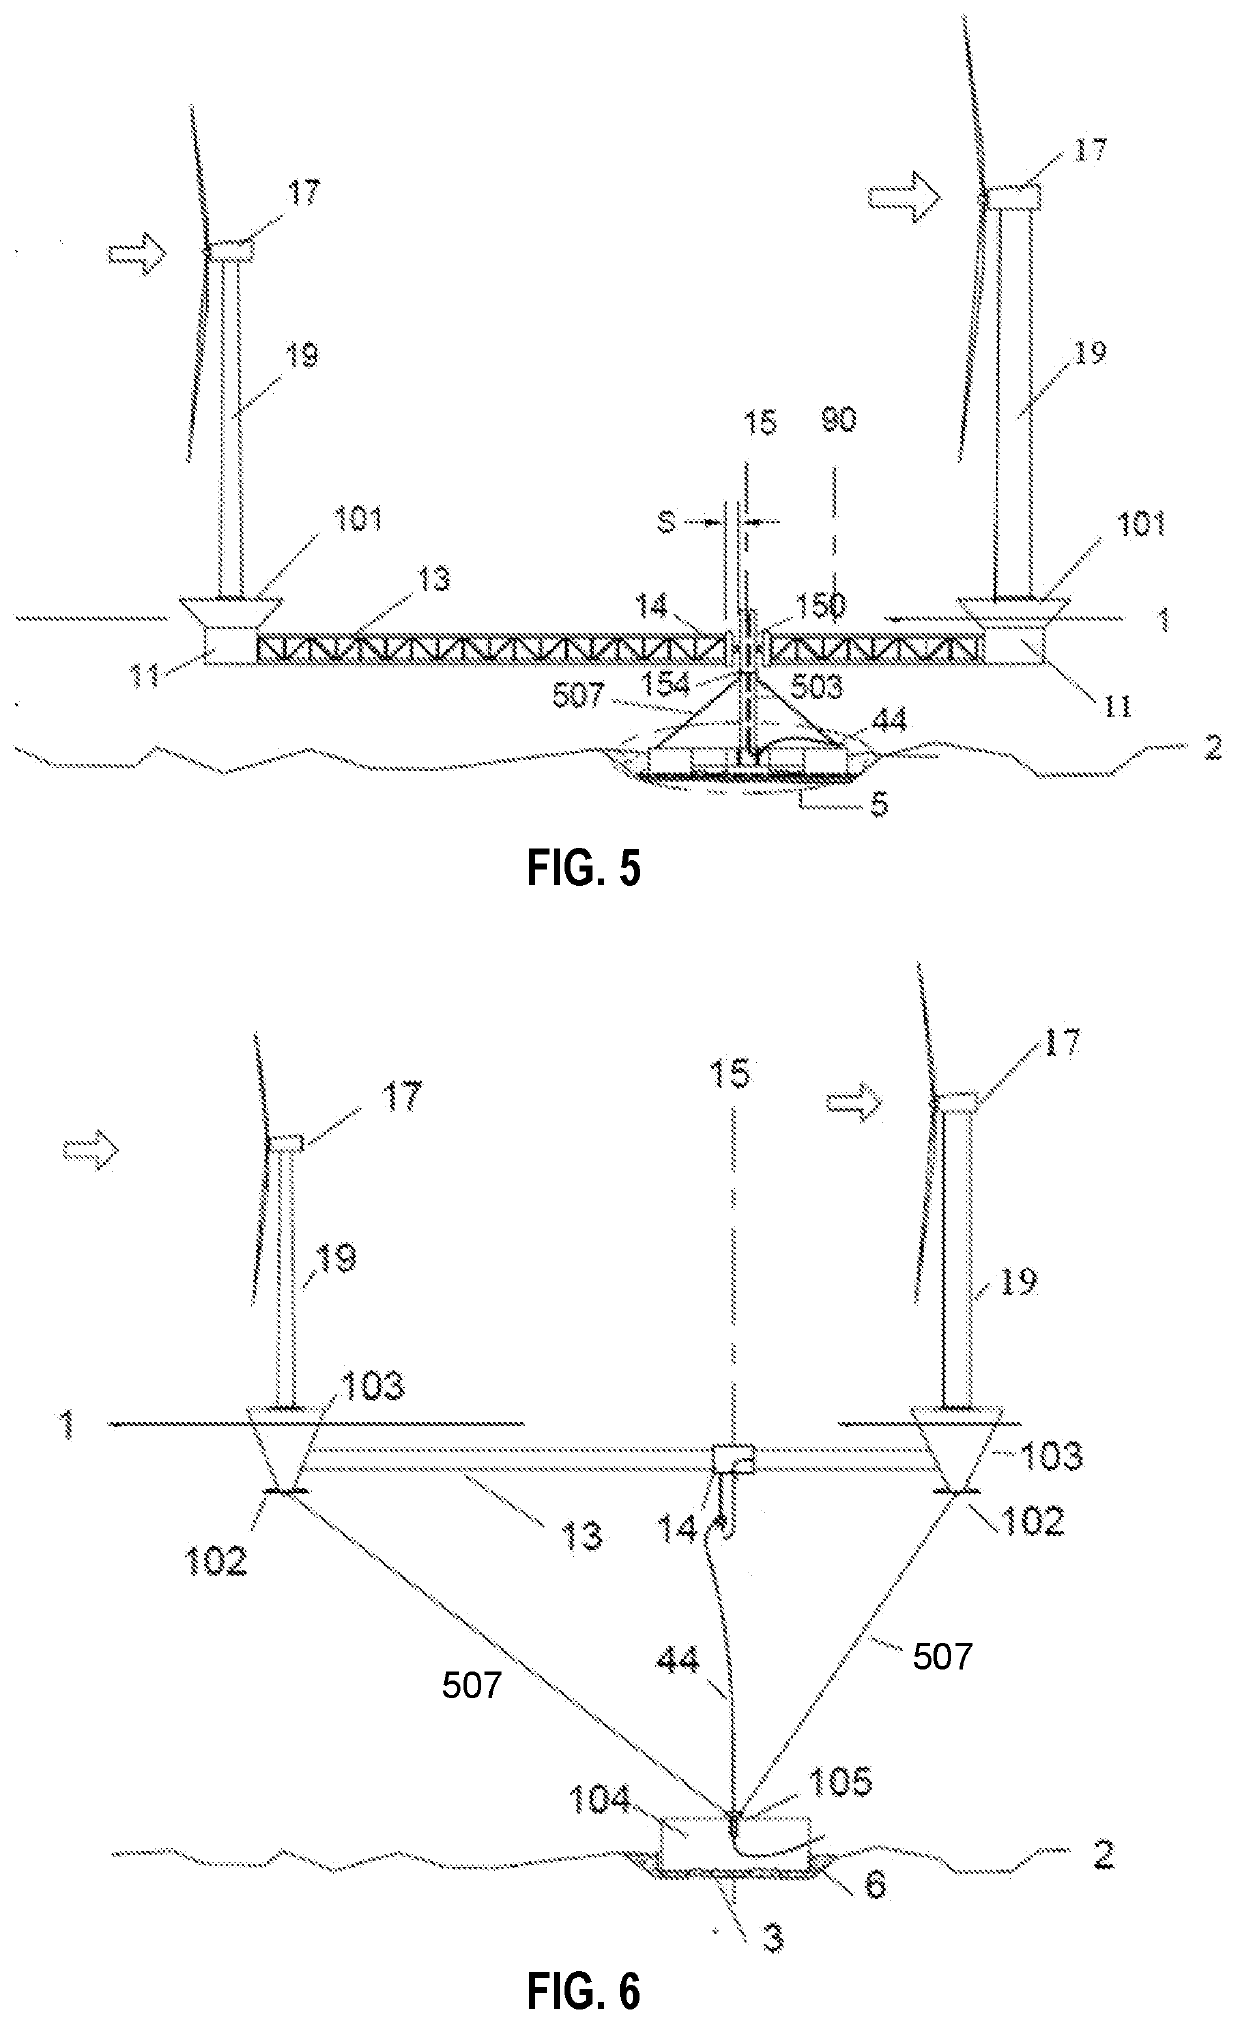 Self-aligning to wind facing floating platform supporting multi-wind turbines and solar for wind and solar power generation and the construction method thereon